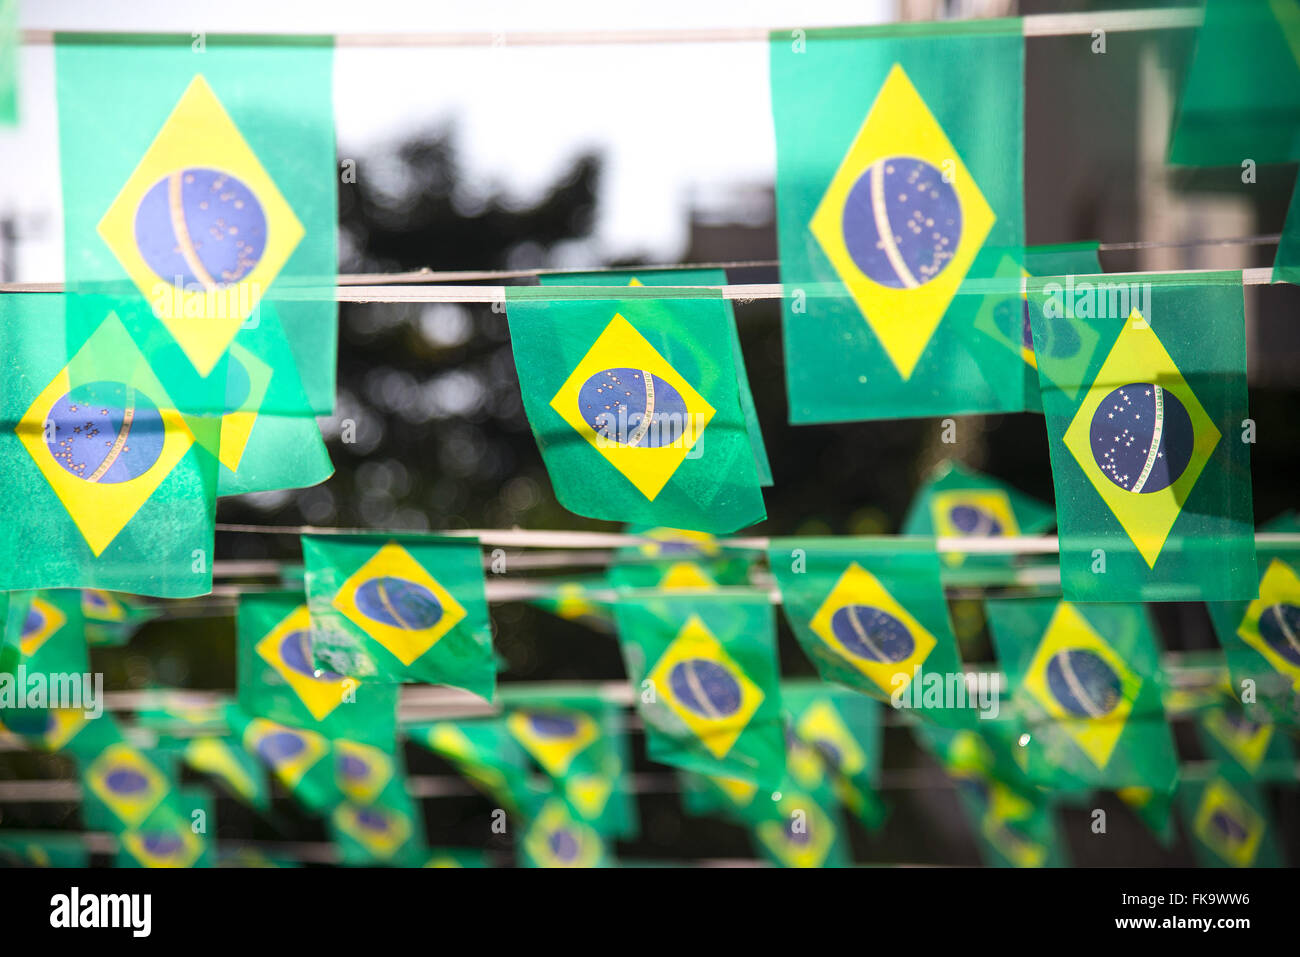 Brazil flags decorating street in Vila Madalena during the 2014 FIFA World Cup Stock Photo